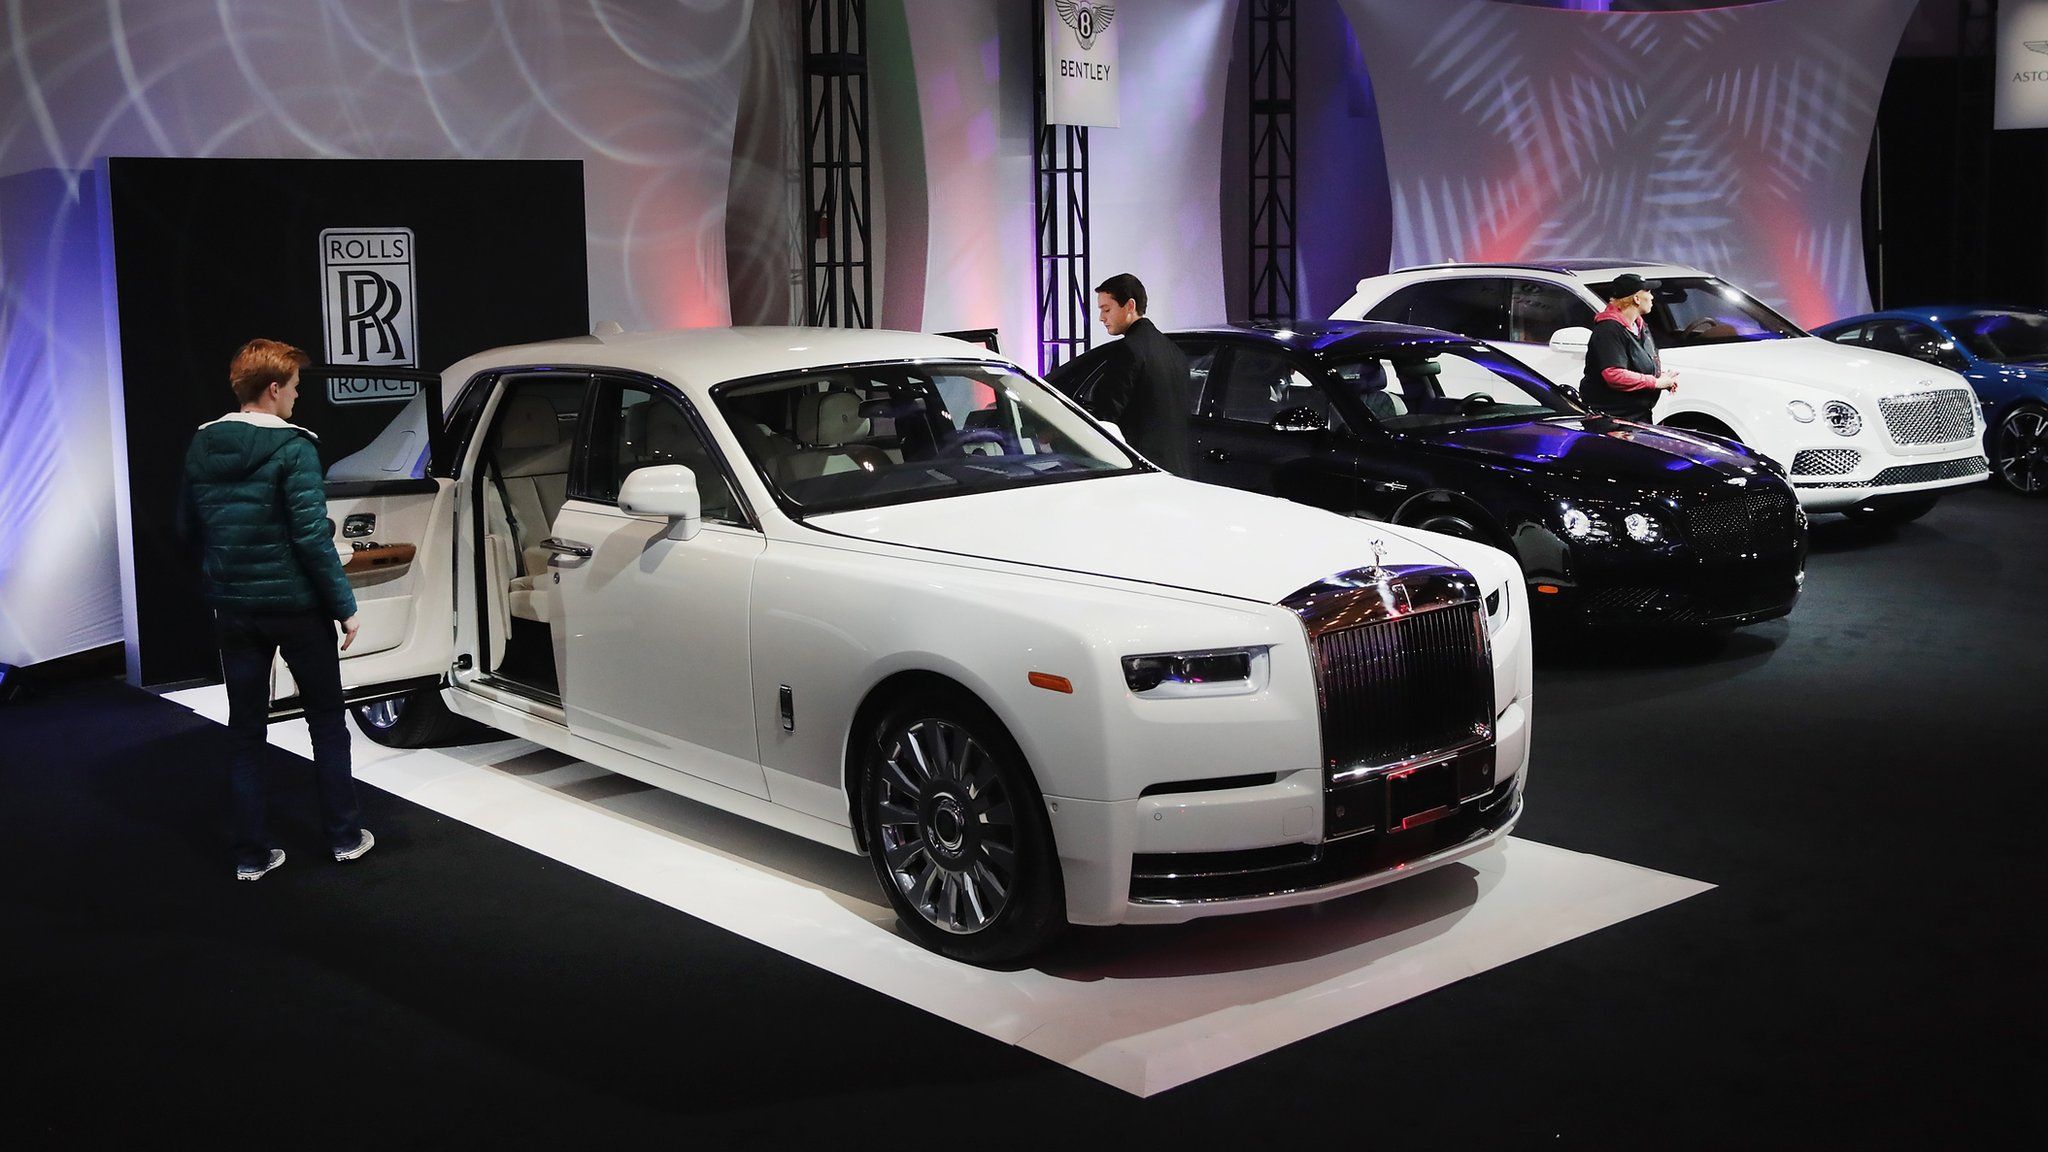 Rolls-Royce (L) and Bentley show off their new cars at the North American International Auto Show (NAIAS) on January 14, 2018 in Detroit, Michigan. The show is open to the public from January 20-28